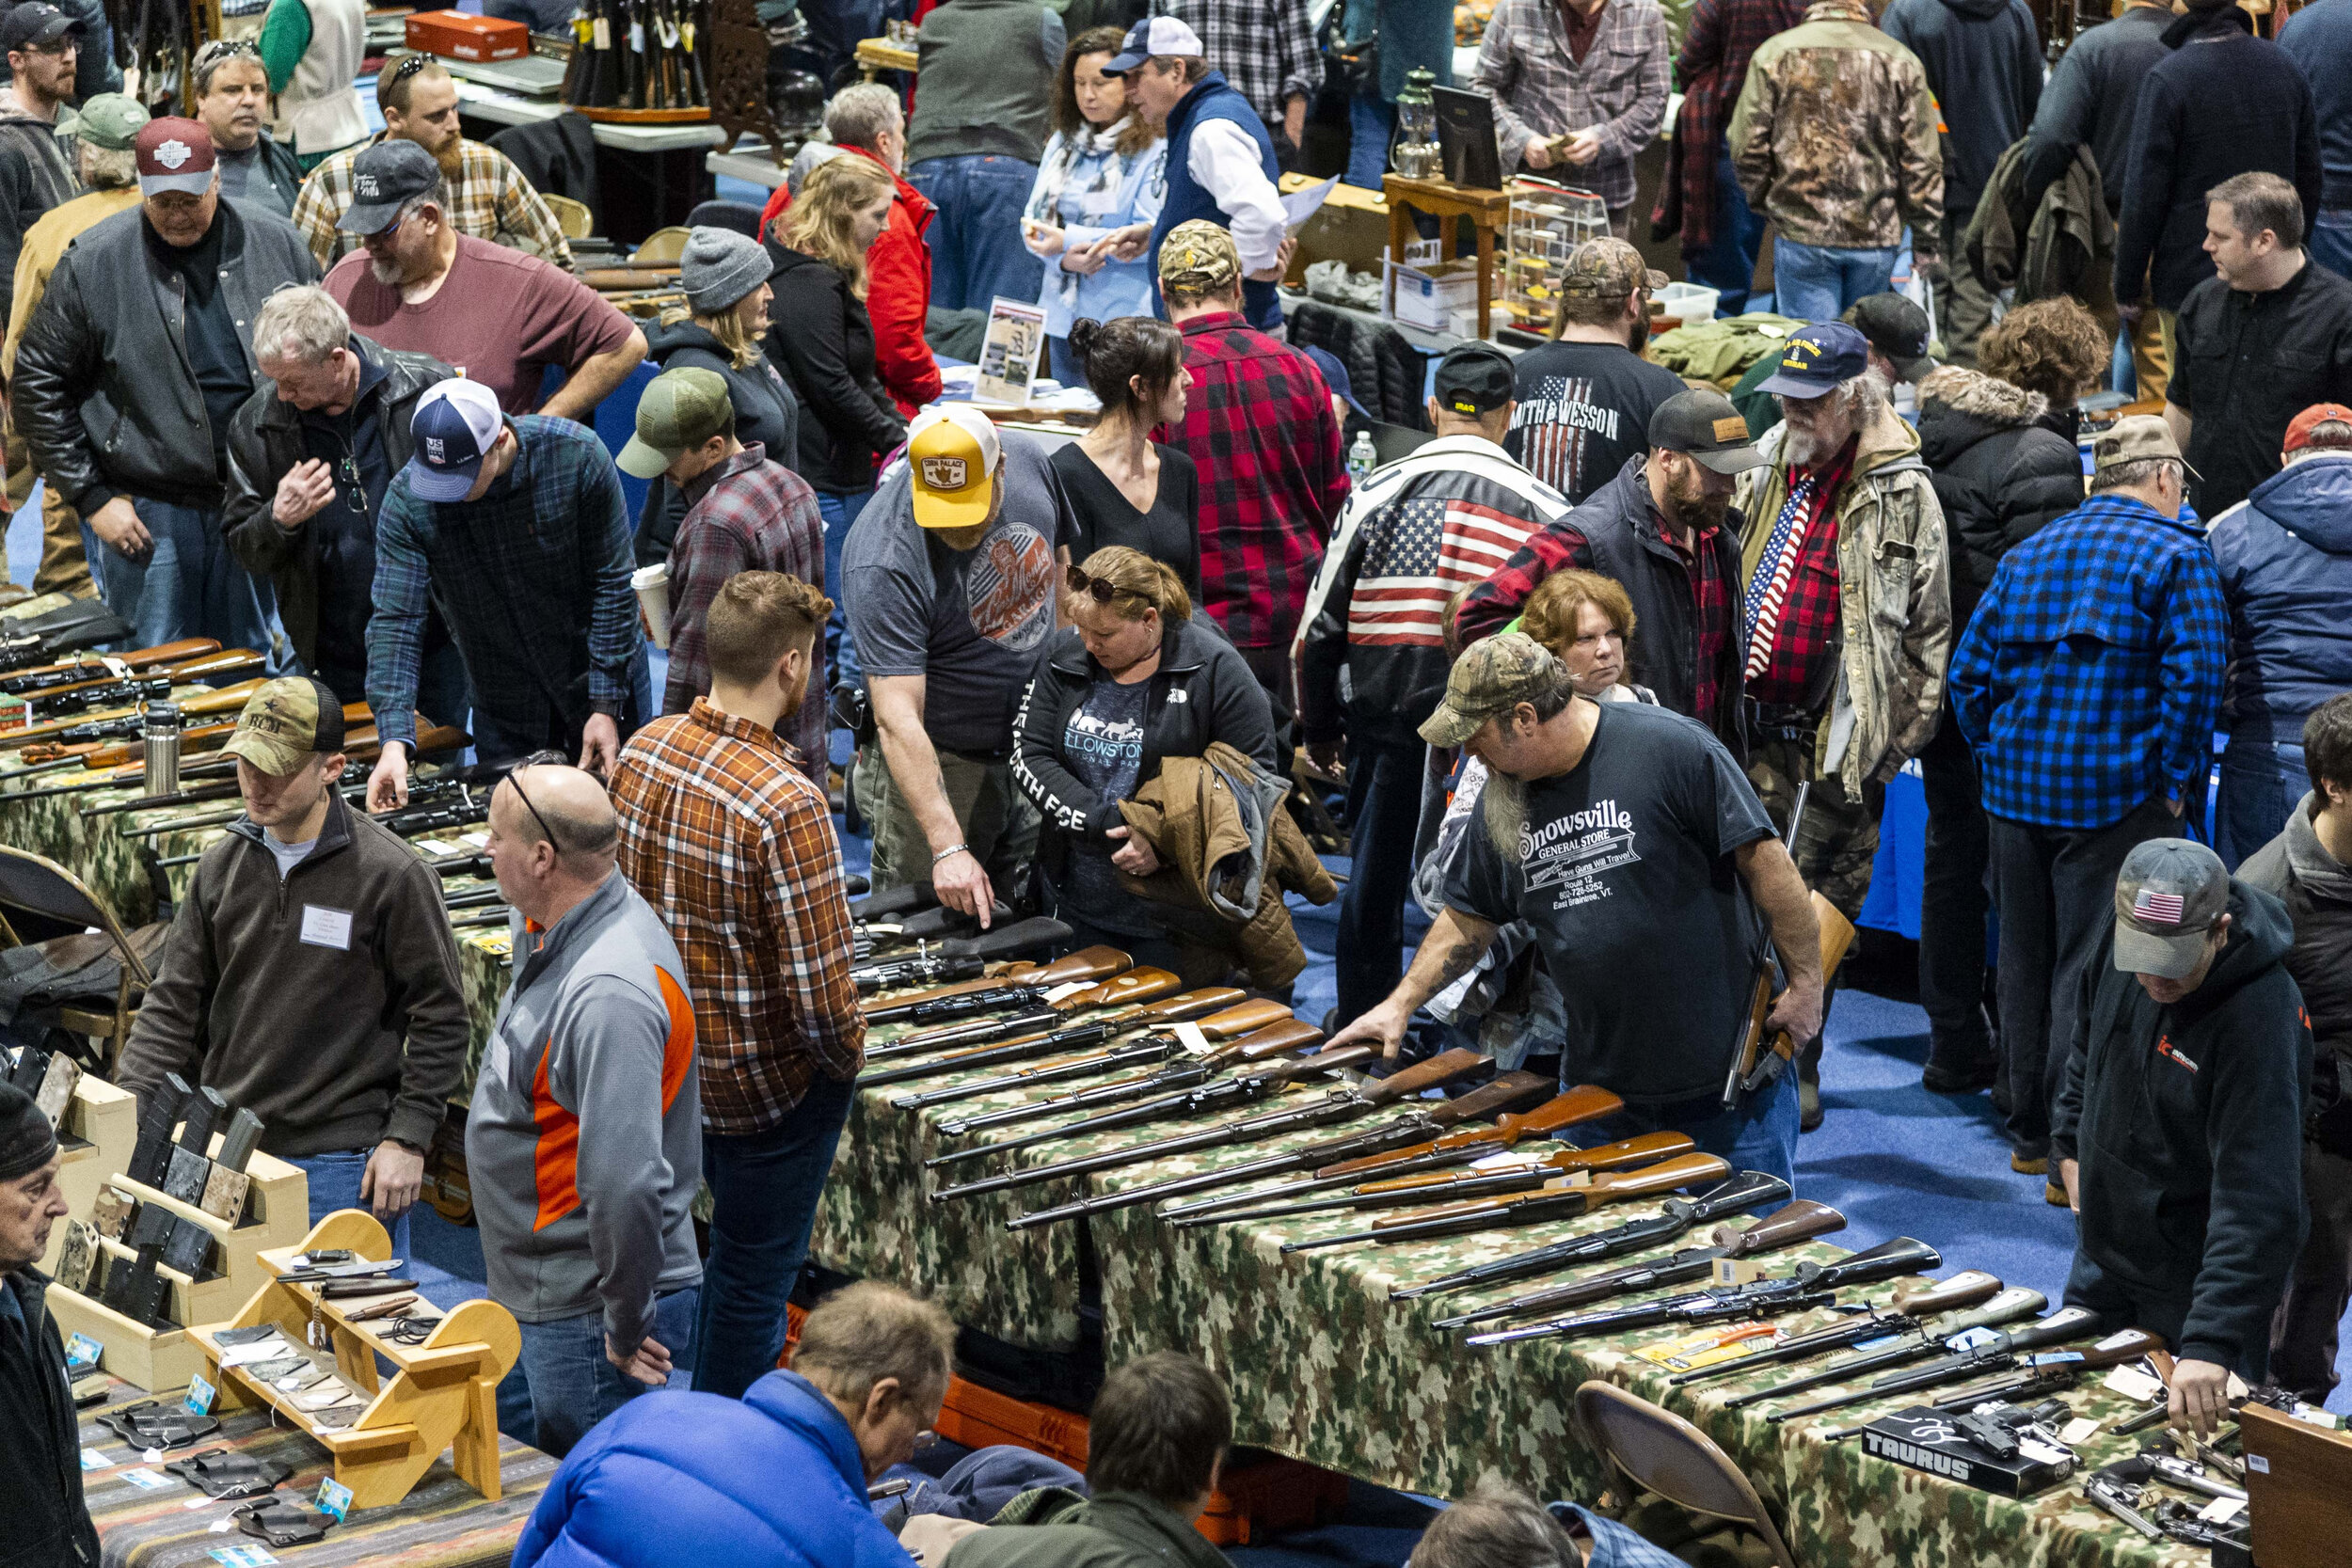  The Barre Auditorium in Barre, VT is packed for the Barre Fish &amp; Game Club Central Vermont Gun Show on Saturday, February 8th 2020. 